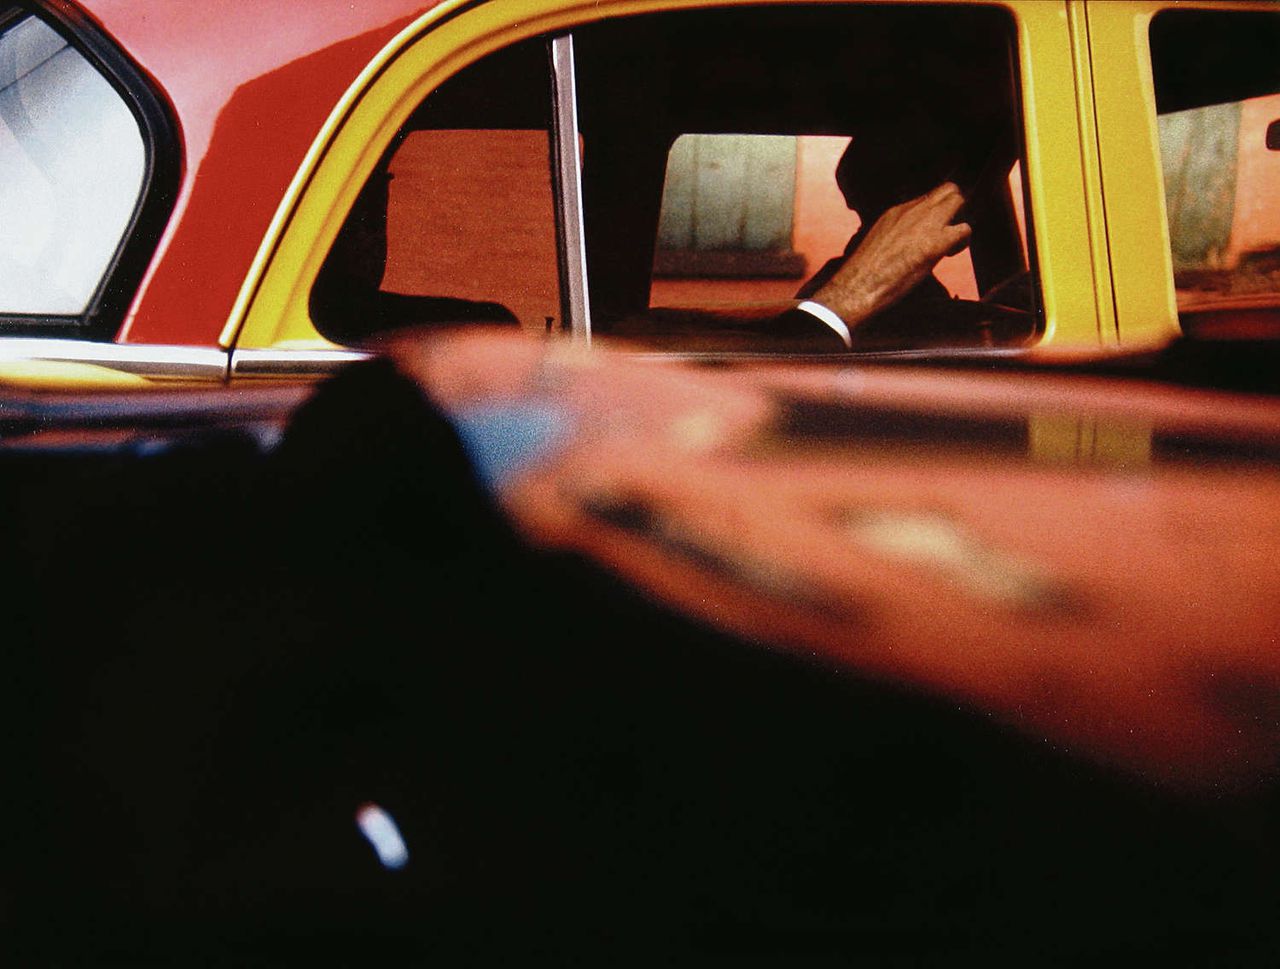 Boven: Saul Leiter, Taxi, 1957Onder: Ray Metzker,Light Lines, 1958